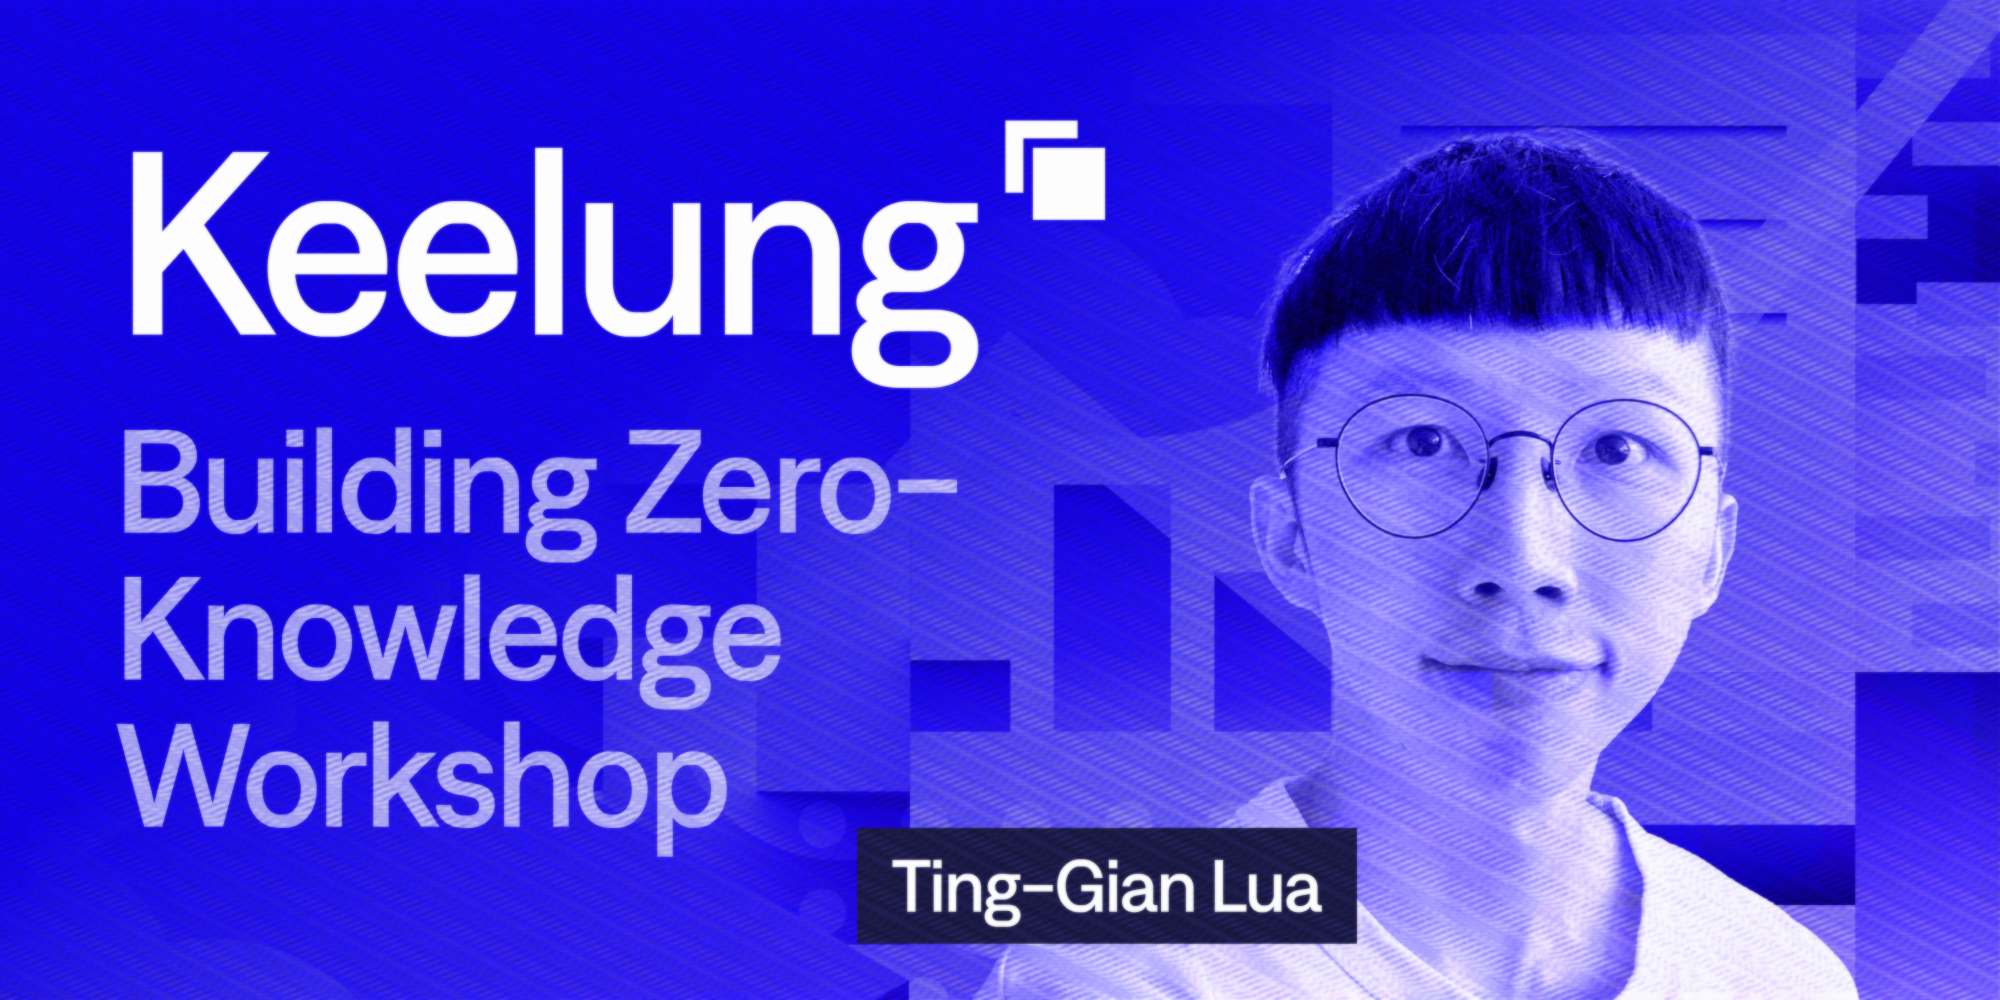 Building Zero-Knowledge With Keelung